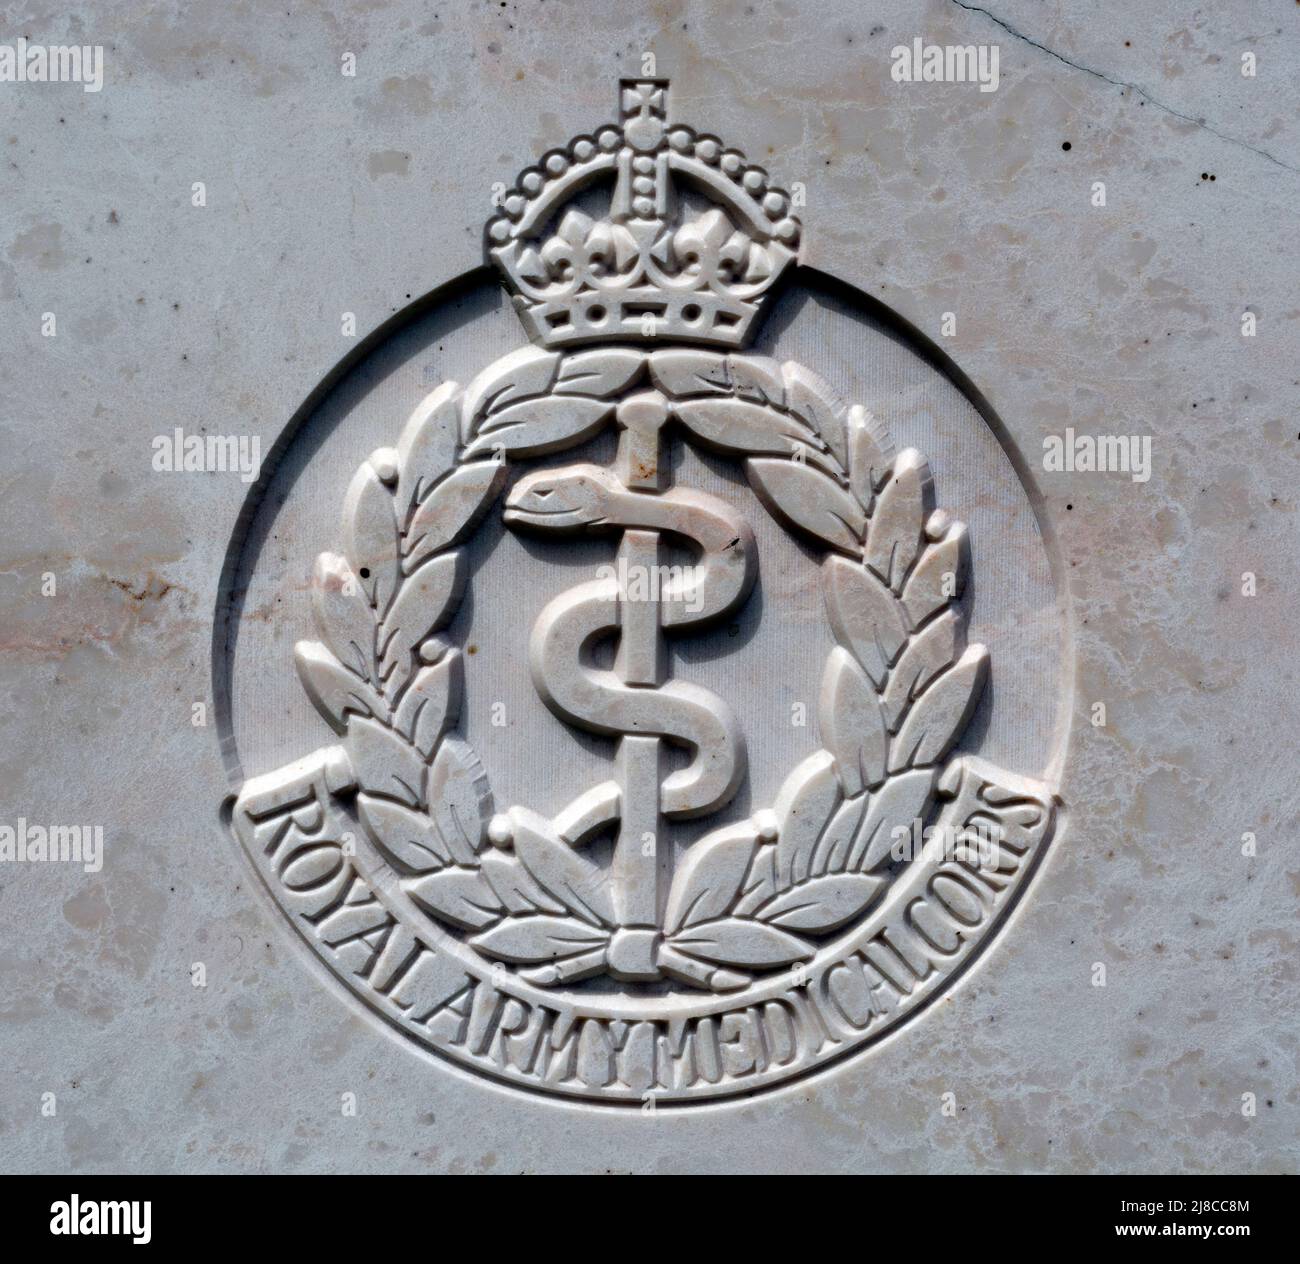 Army Medical Corps badge on a war grave, UK Stock Photo